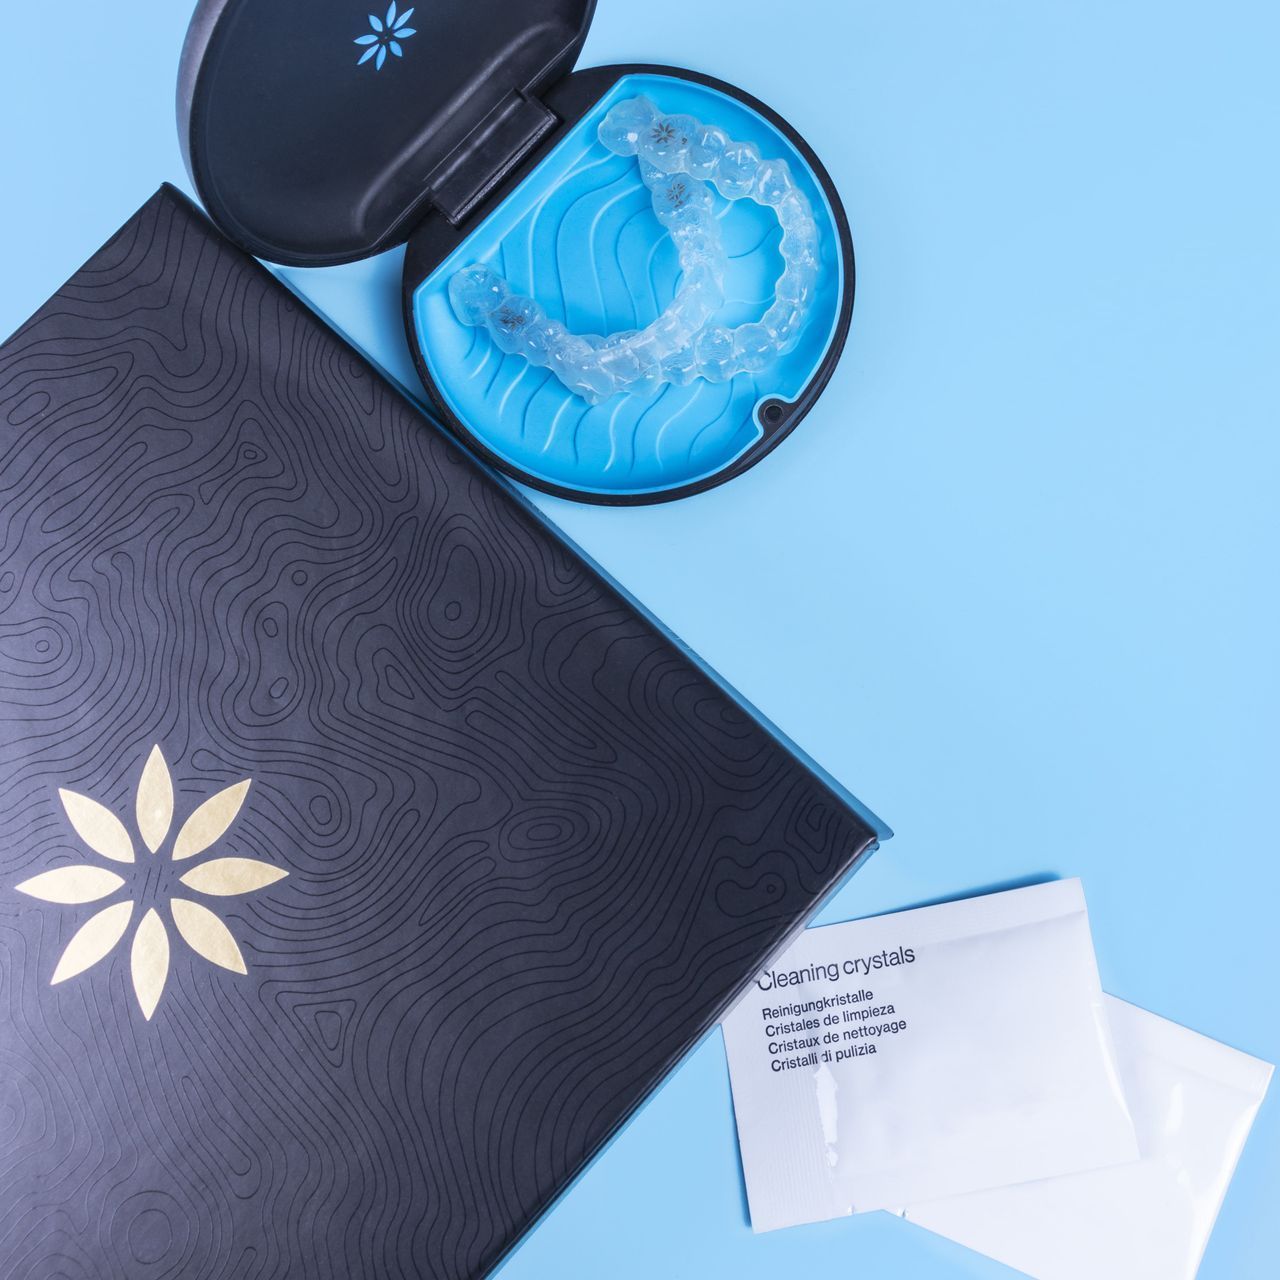 An image of an Invisalign® case with aligners, Invisalign® packaging, and cleaning crystals